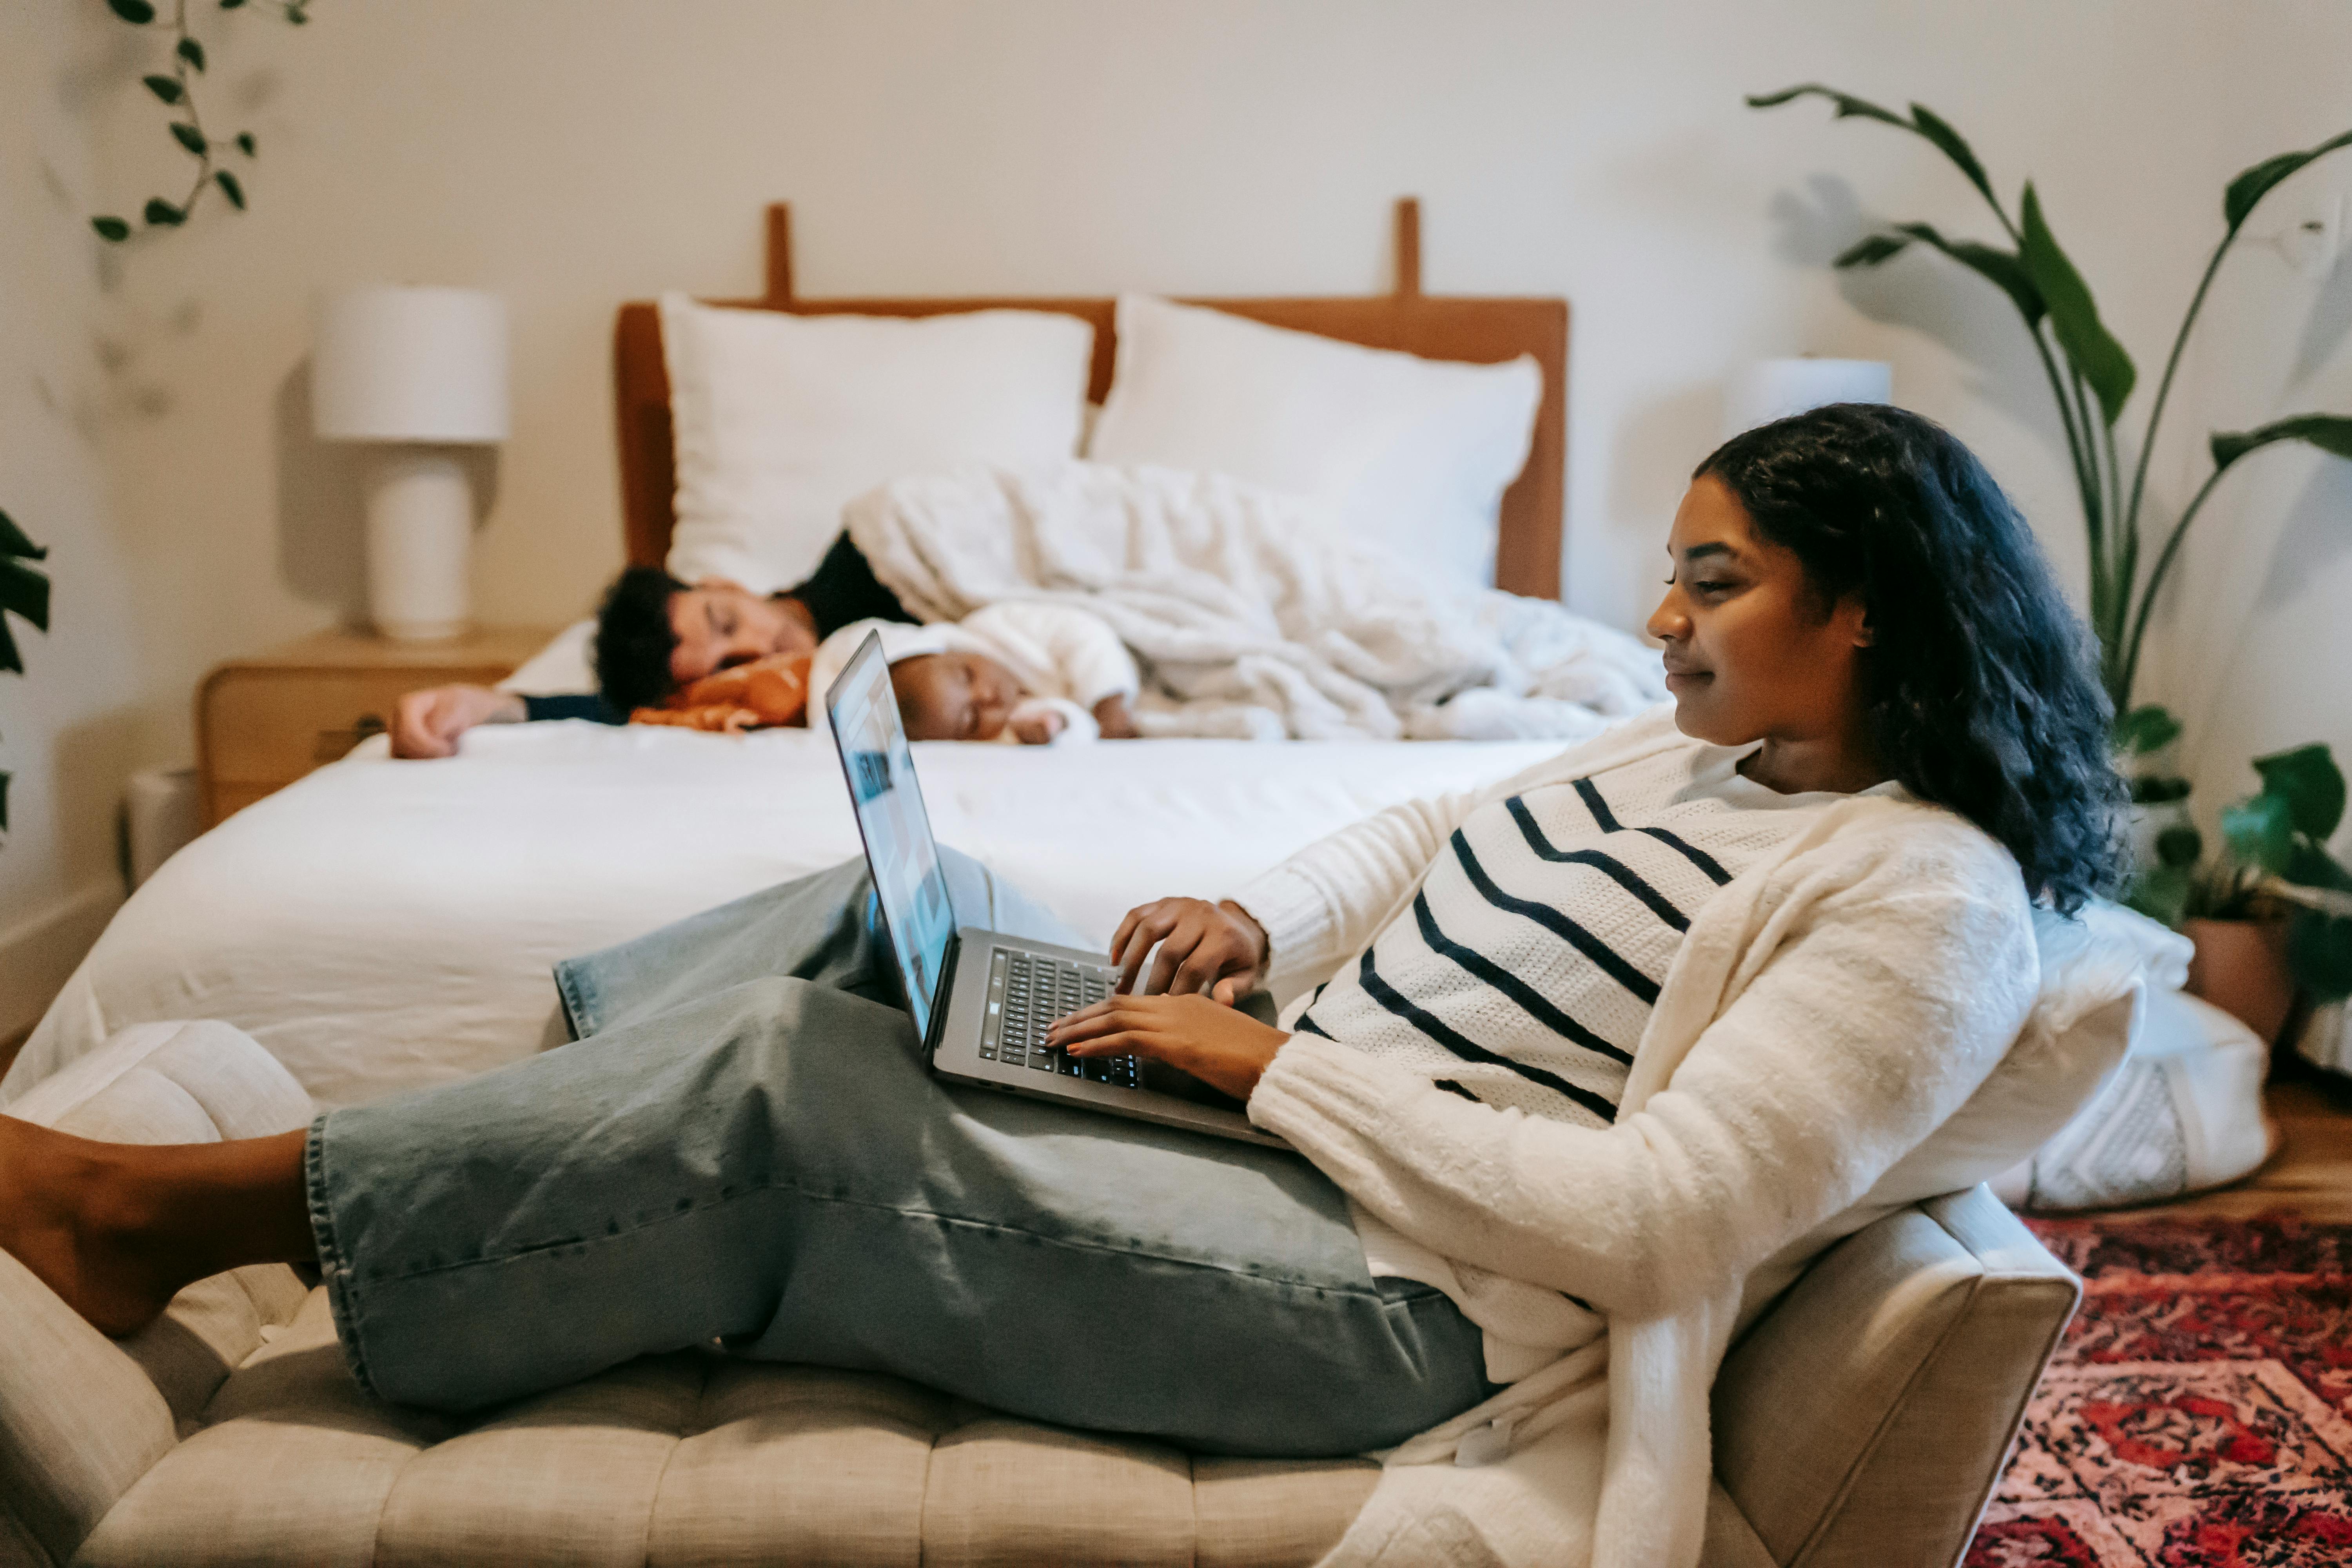 ethnic woman working on laptop while man with baby sleeping on bed